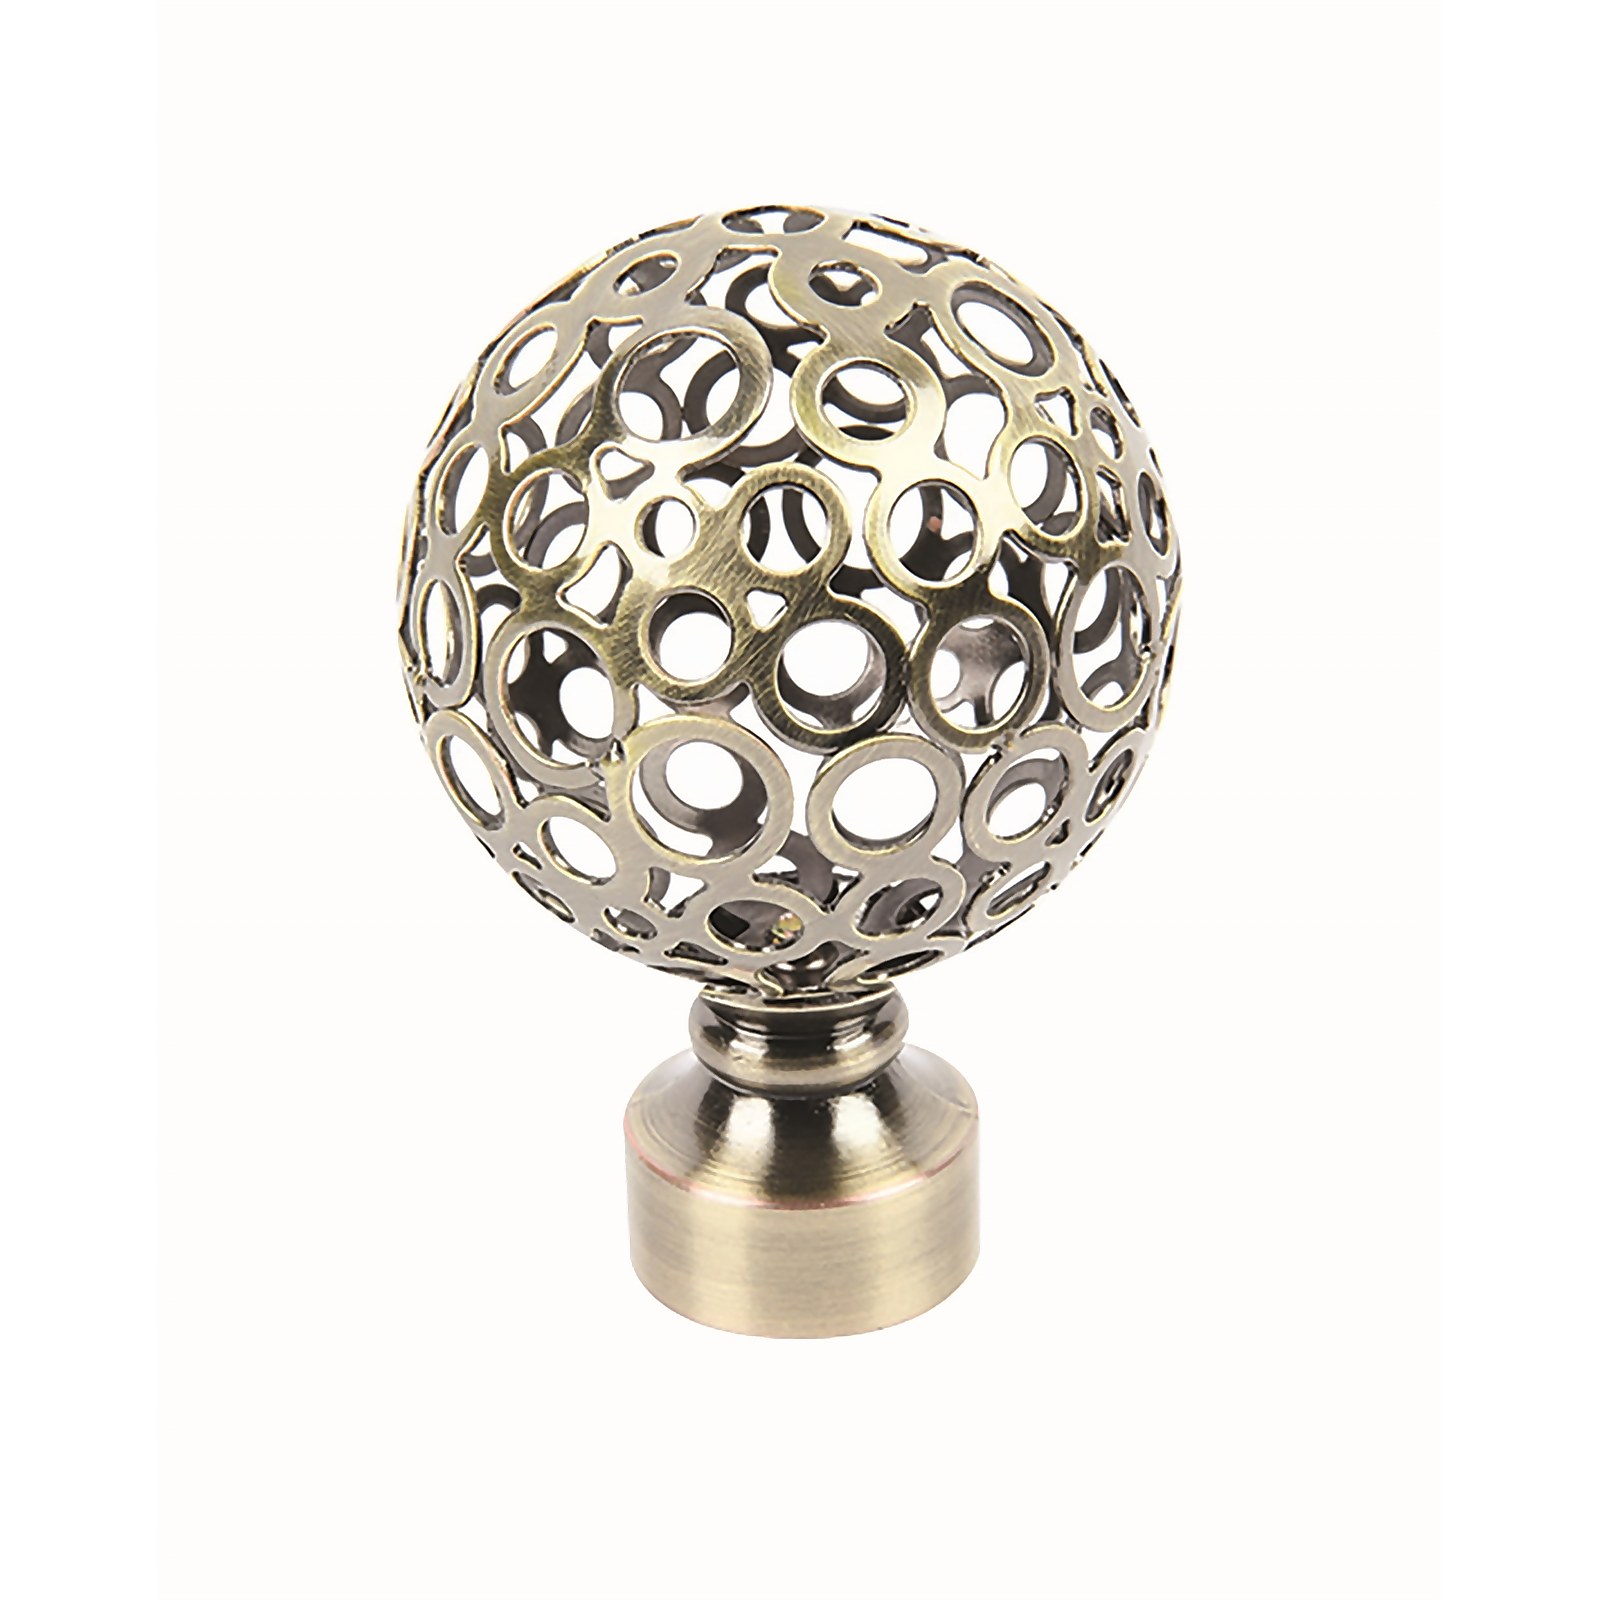 Photo of Patterned Orb Finial - Antique Brass